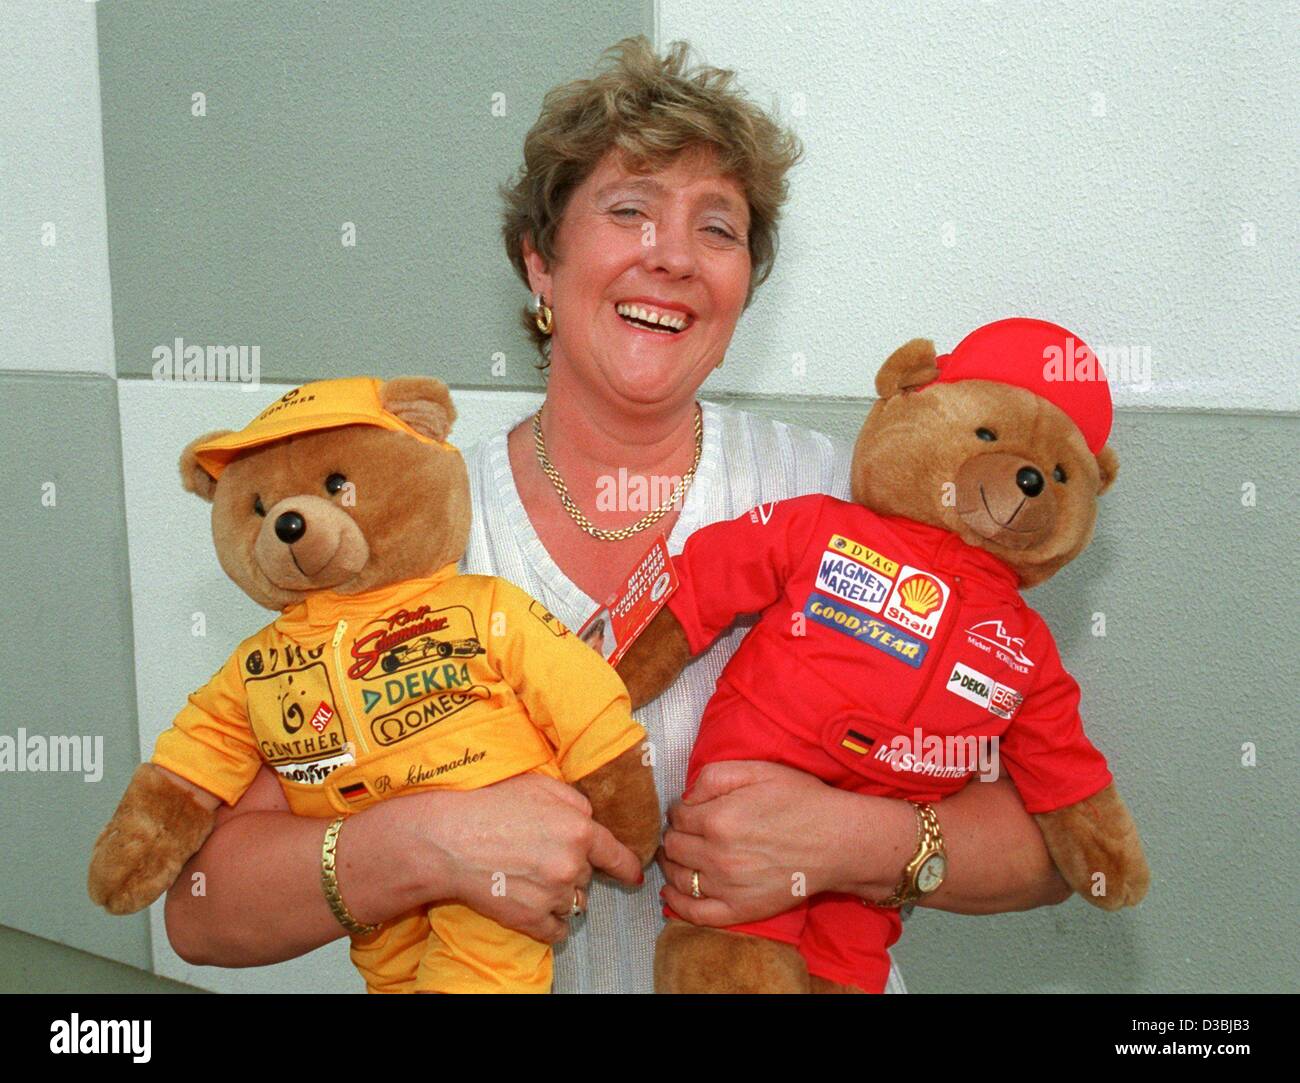 (dpa files) - Elisabeth Schumacher, mother of German Formula One drivers Michael and Ralf Schumacher, holds two teddy bears wearing red (Michael Schumacher) and yellow (Ralf Schuhmacher) racing outfits at the family's cart circuit in Kerpen, Germany, July 1998. A few days ago, 55-year-old Elisabeth  Stock Photo